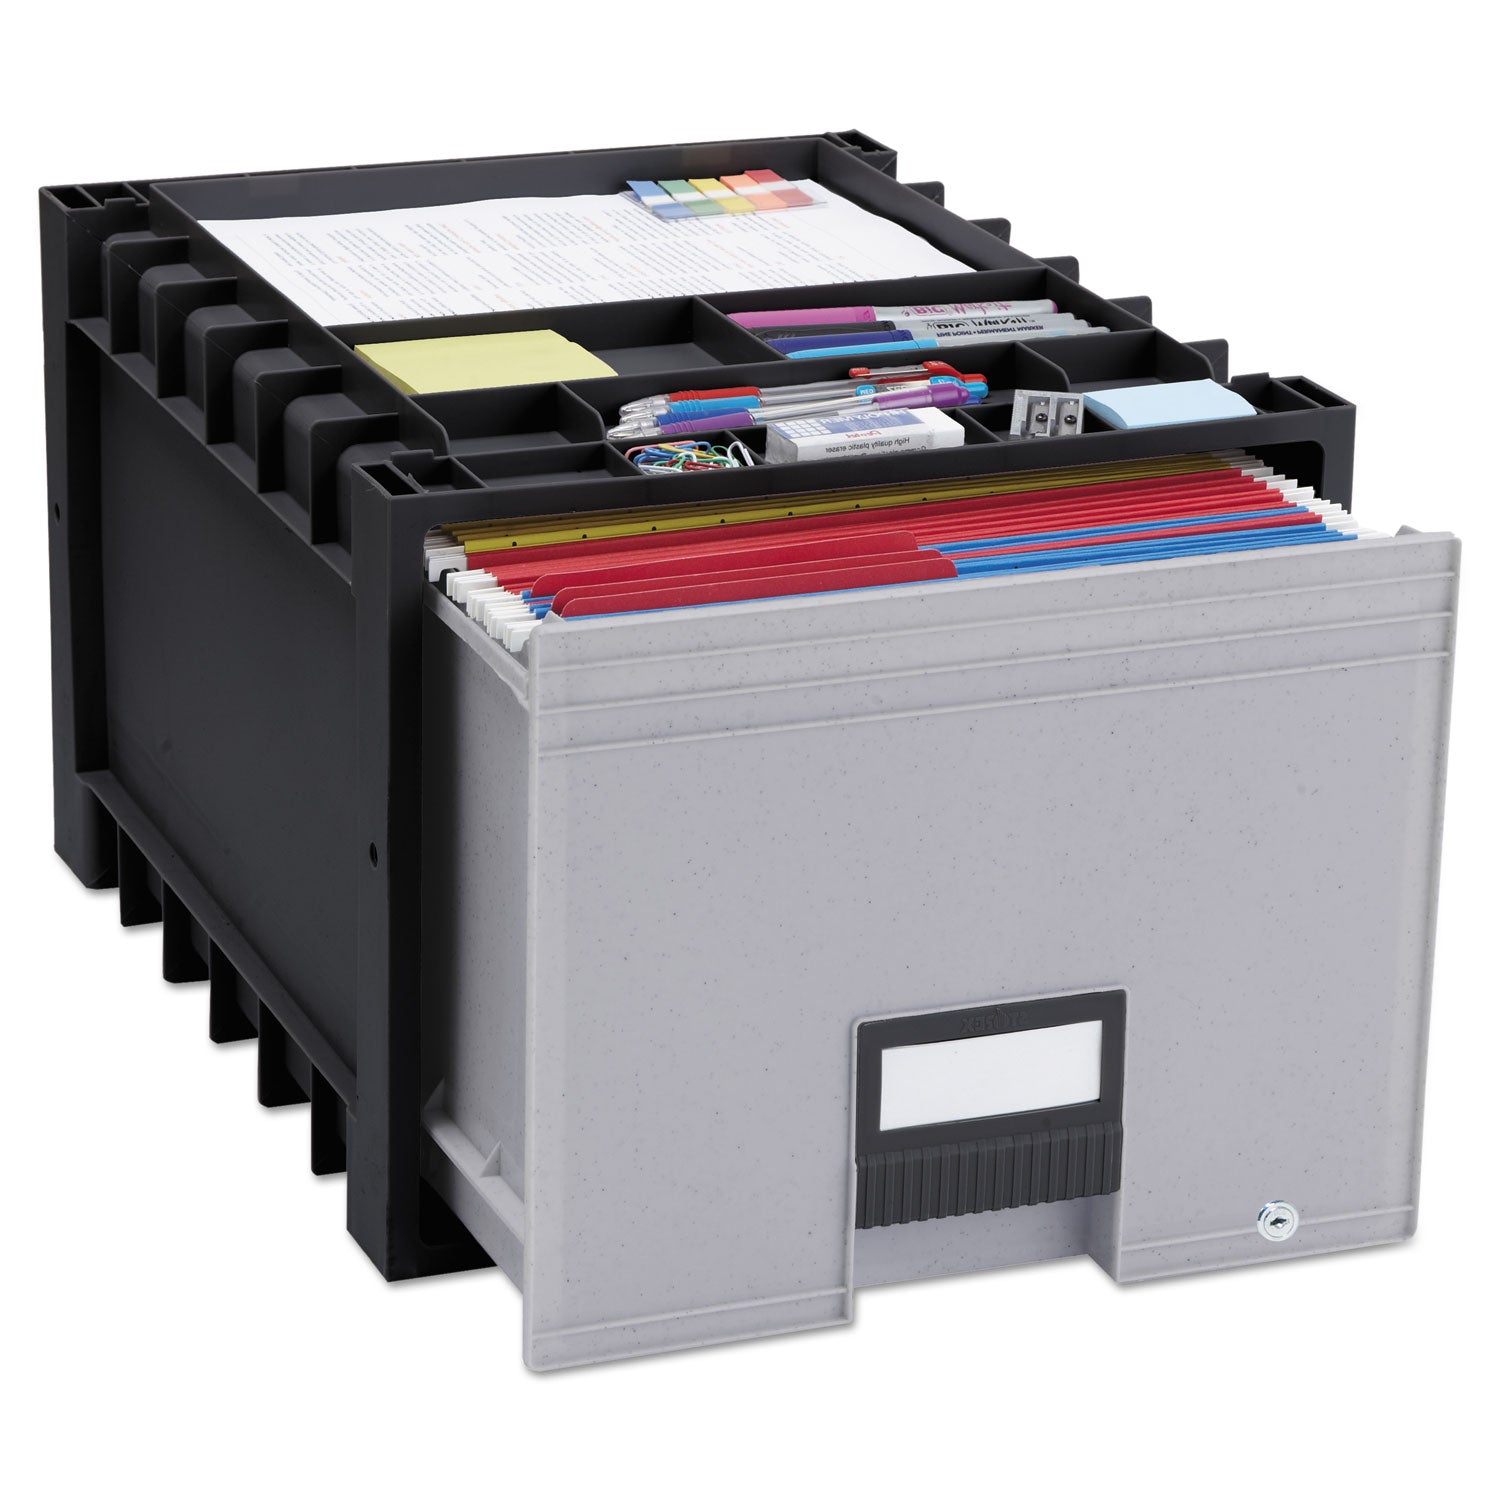 Archive Storage Drawers with Key Lock, Letter Files, 15.25" x 18" x 11.5", Black/Gray - 